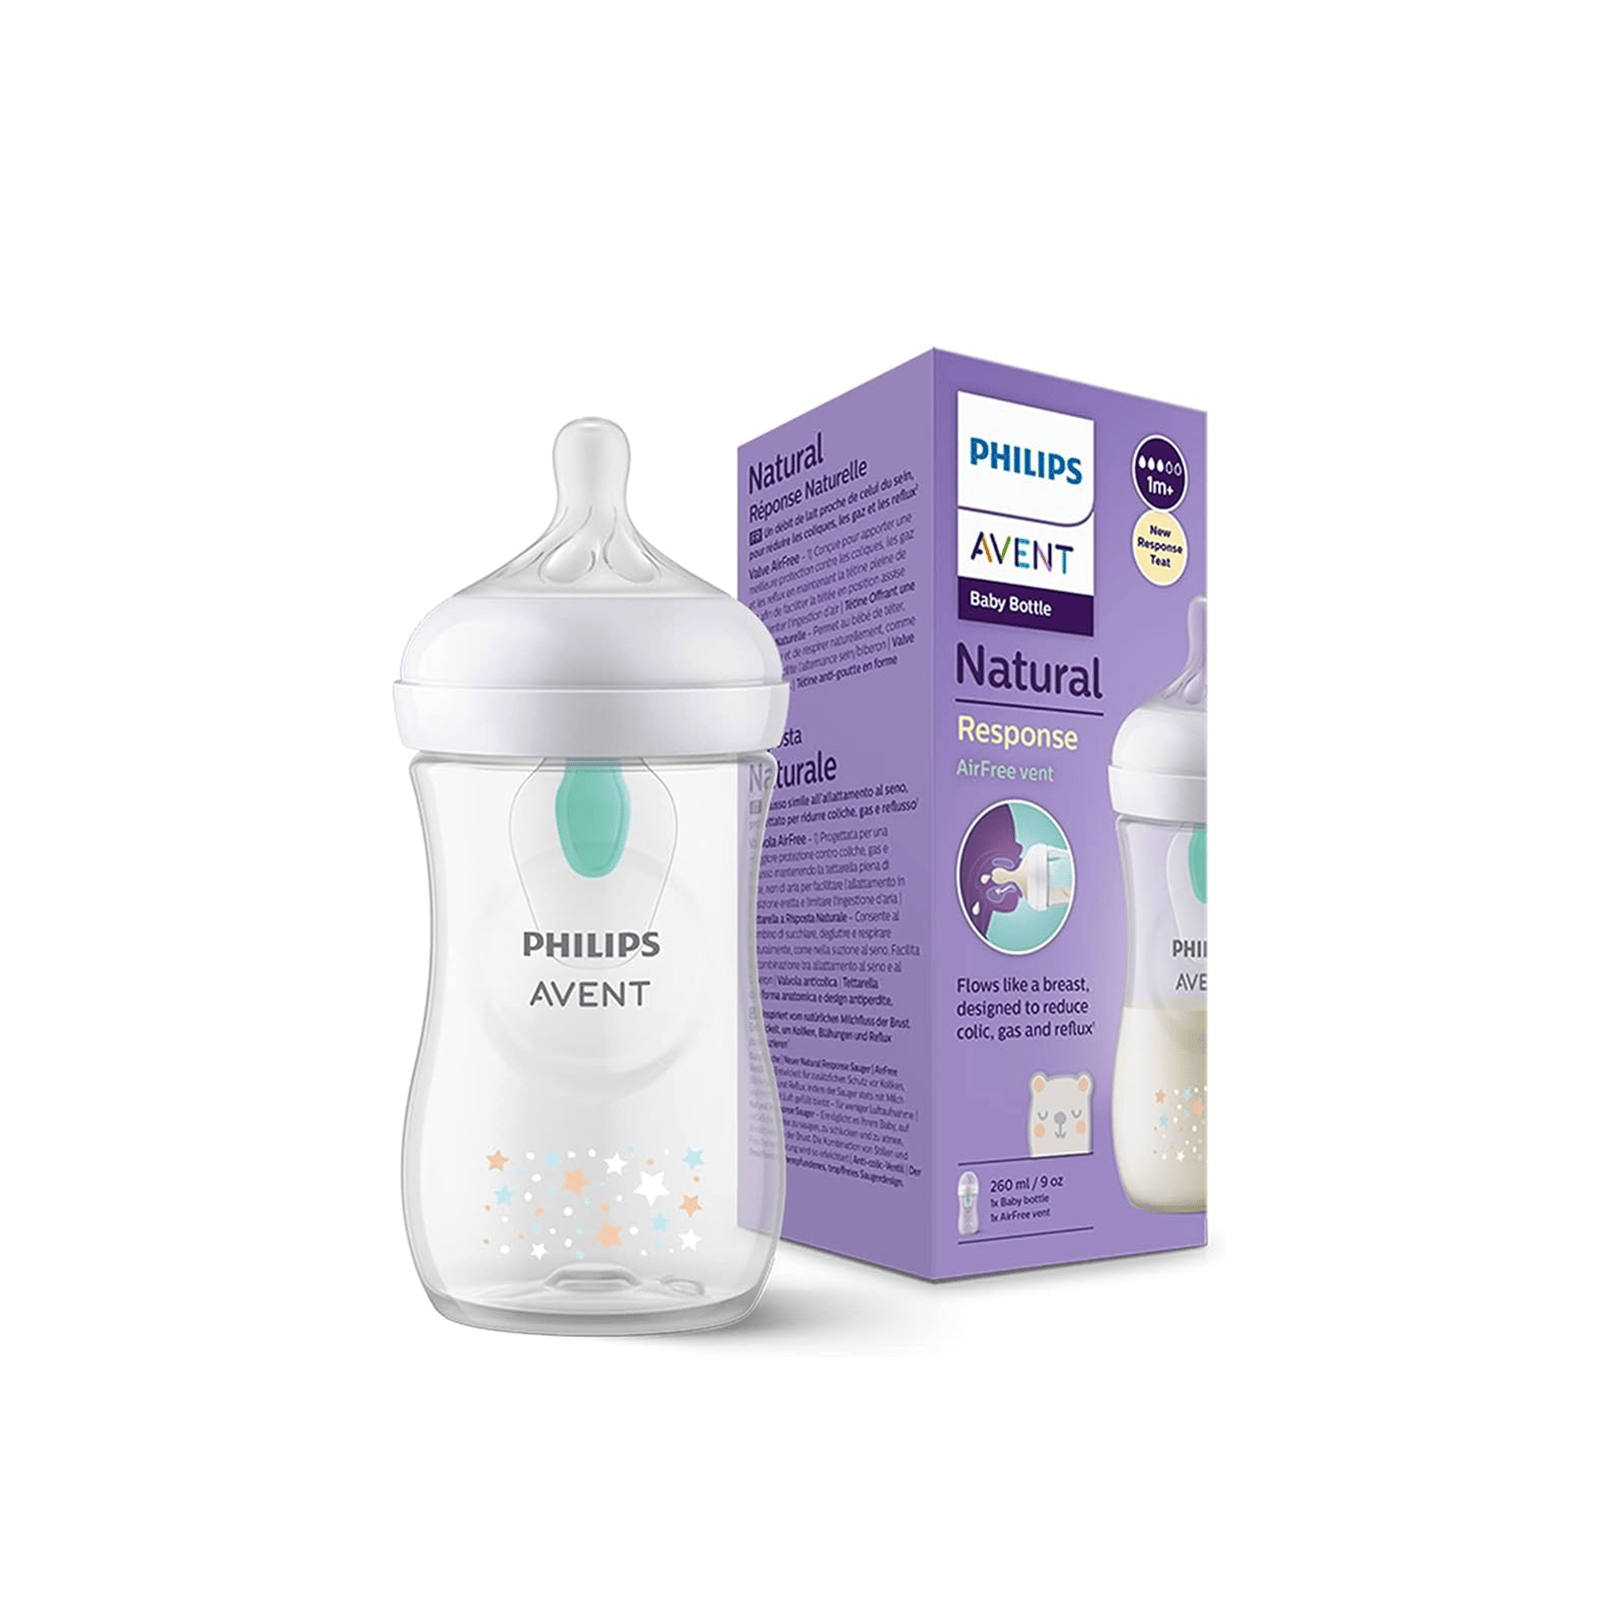 Philips Avent Natural Response AirFree Vent Baby Bottle 1m+